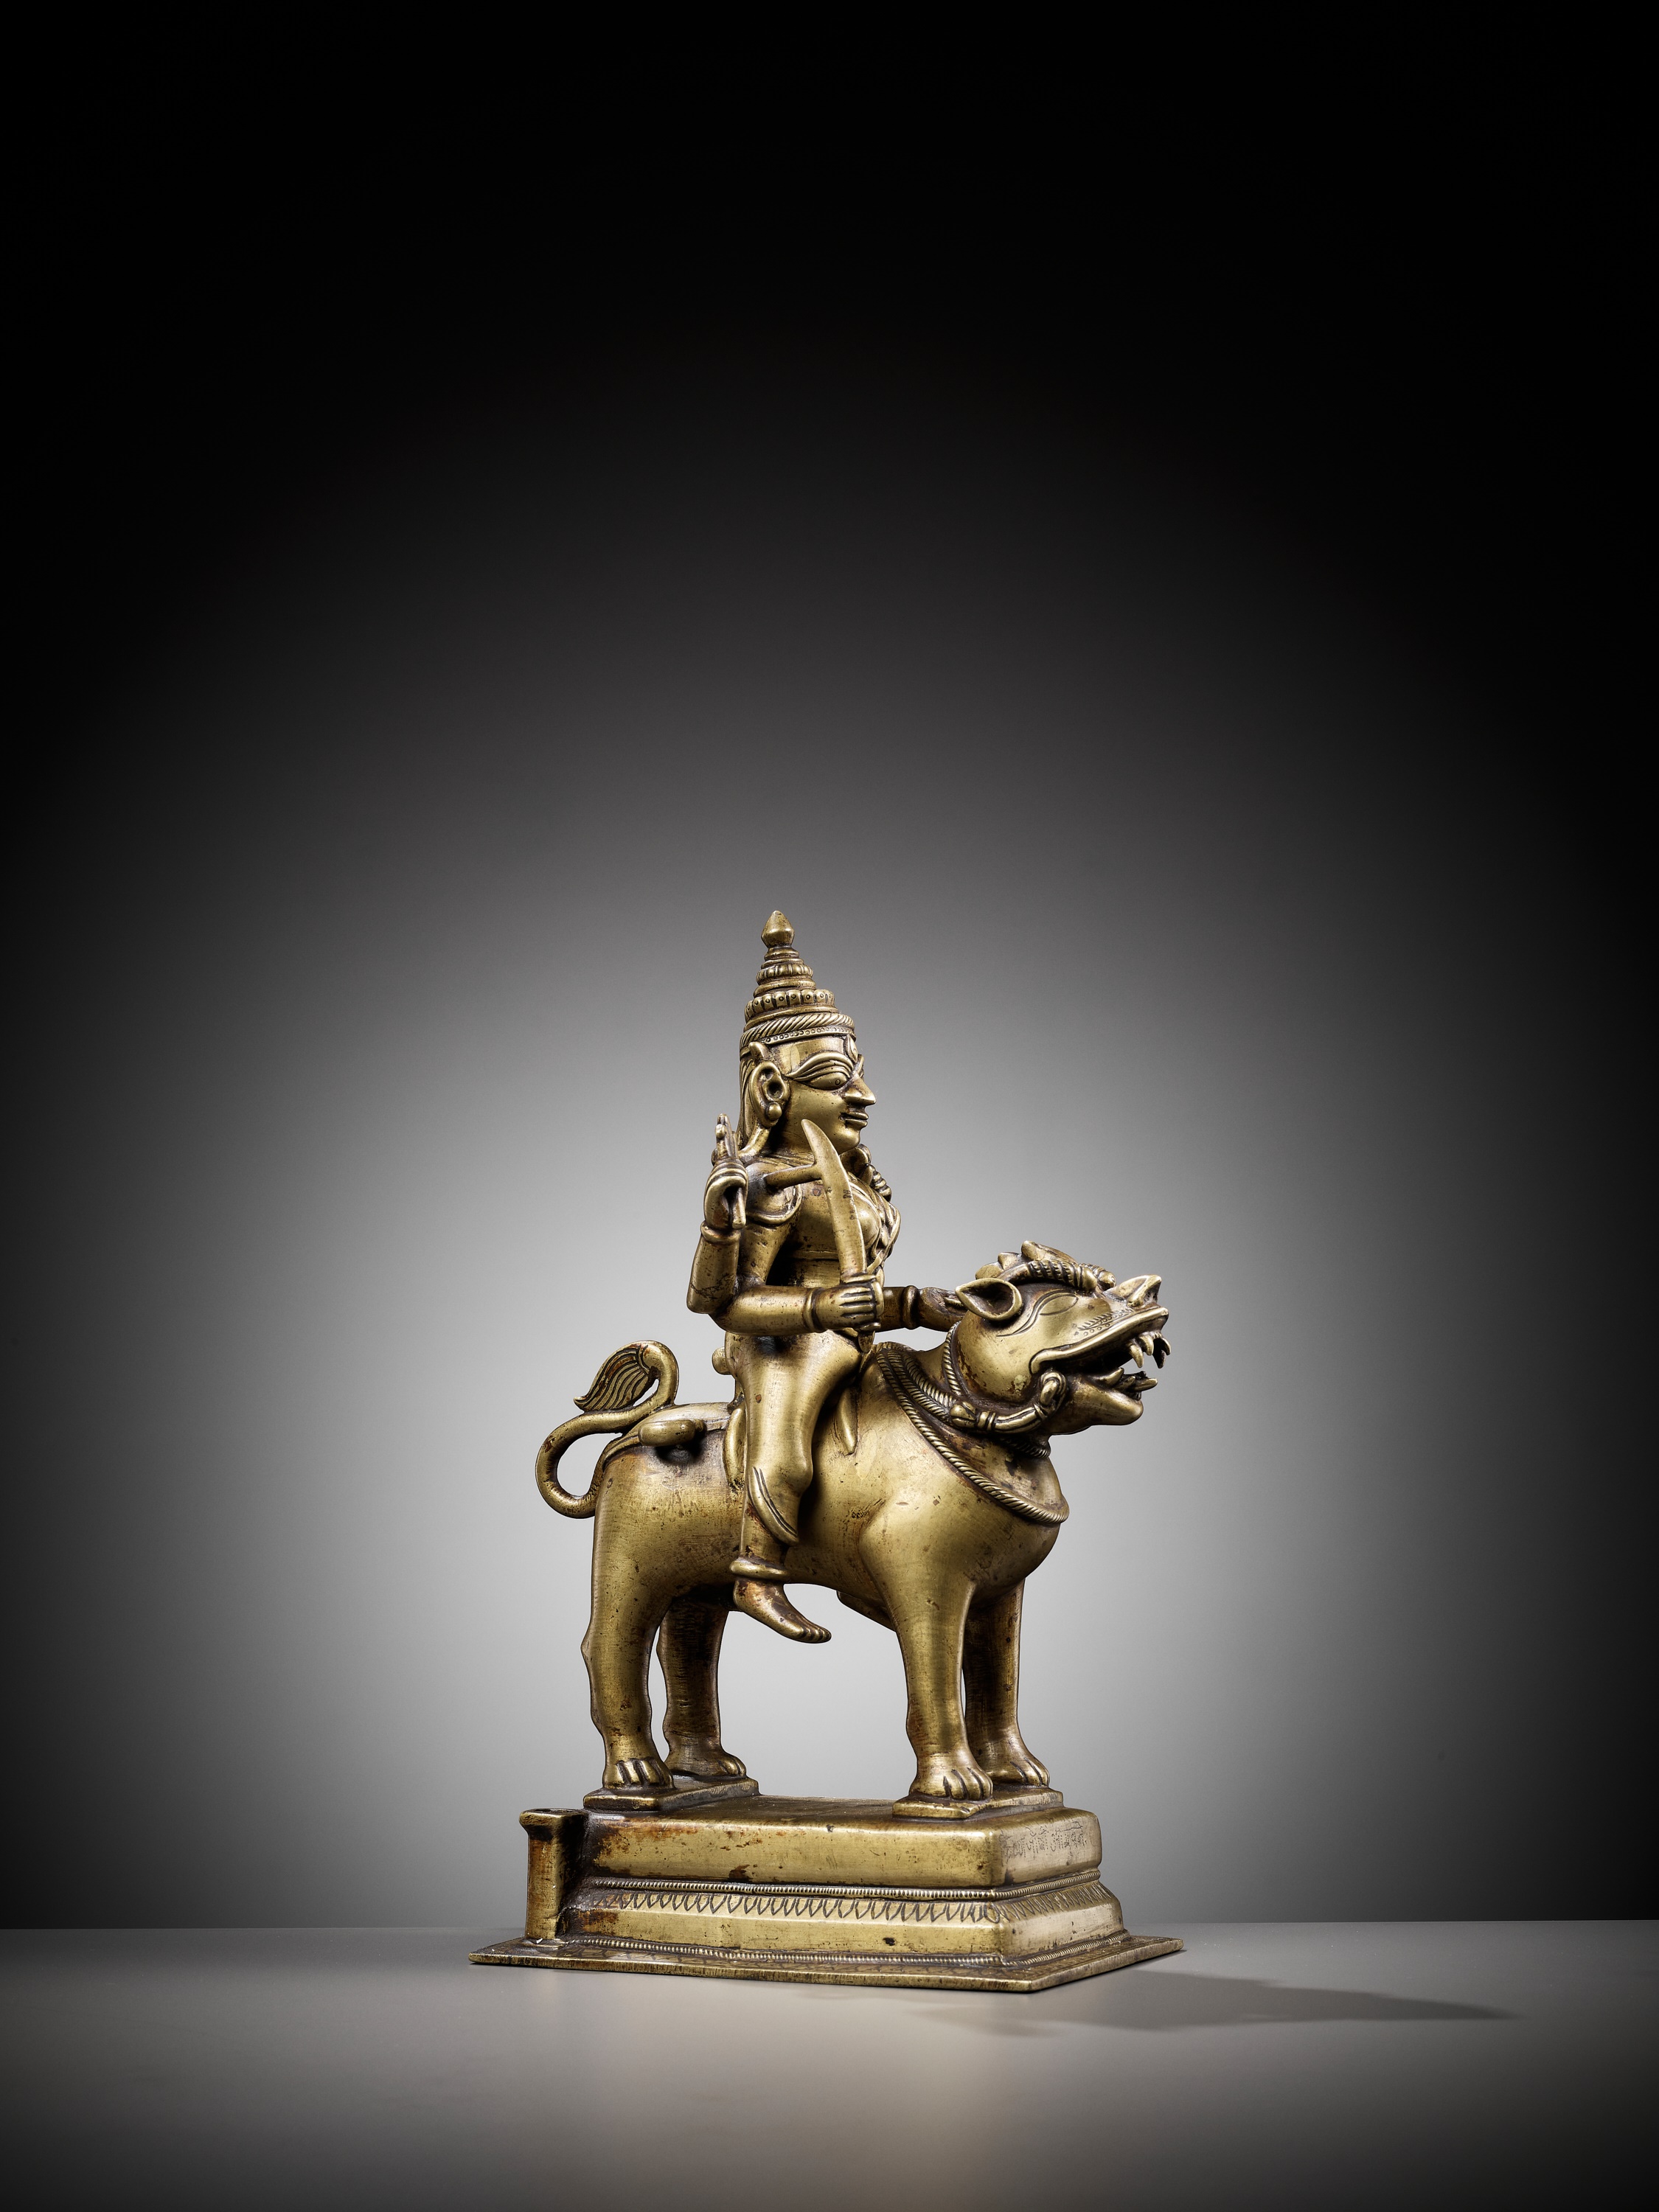 A BRONZE FIGURE OF DURGA RIDING A LION, INDIA, 15TH CENTURY - Image 3 of 11